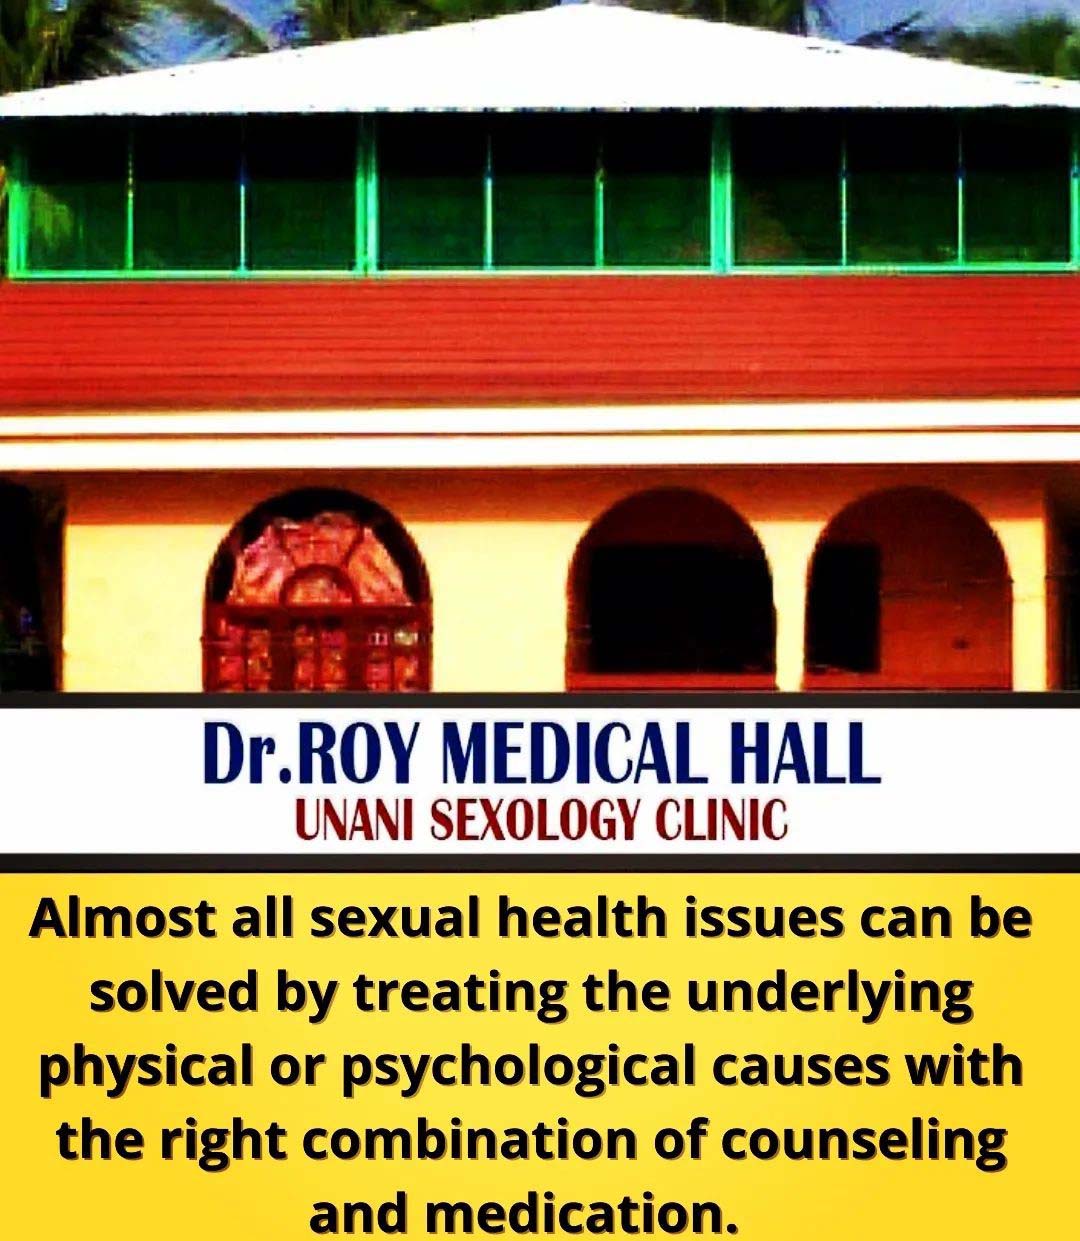 Sexologist Doctor for Saudi Arabia, therapy for Sexual Weakness, Premature Ejaculation, Nocturnal Emission, Spermatorrhea, Loss of Libido, Sexologist Doctor, Sexology Clinic, Dr. Roy Medical Hall